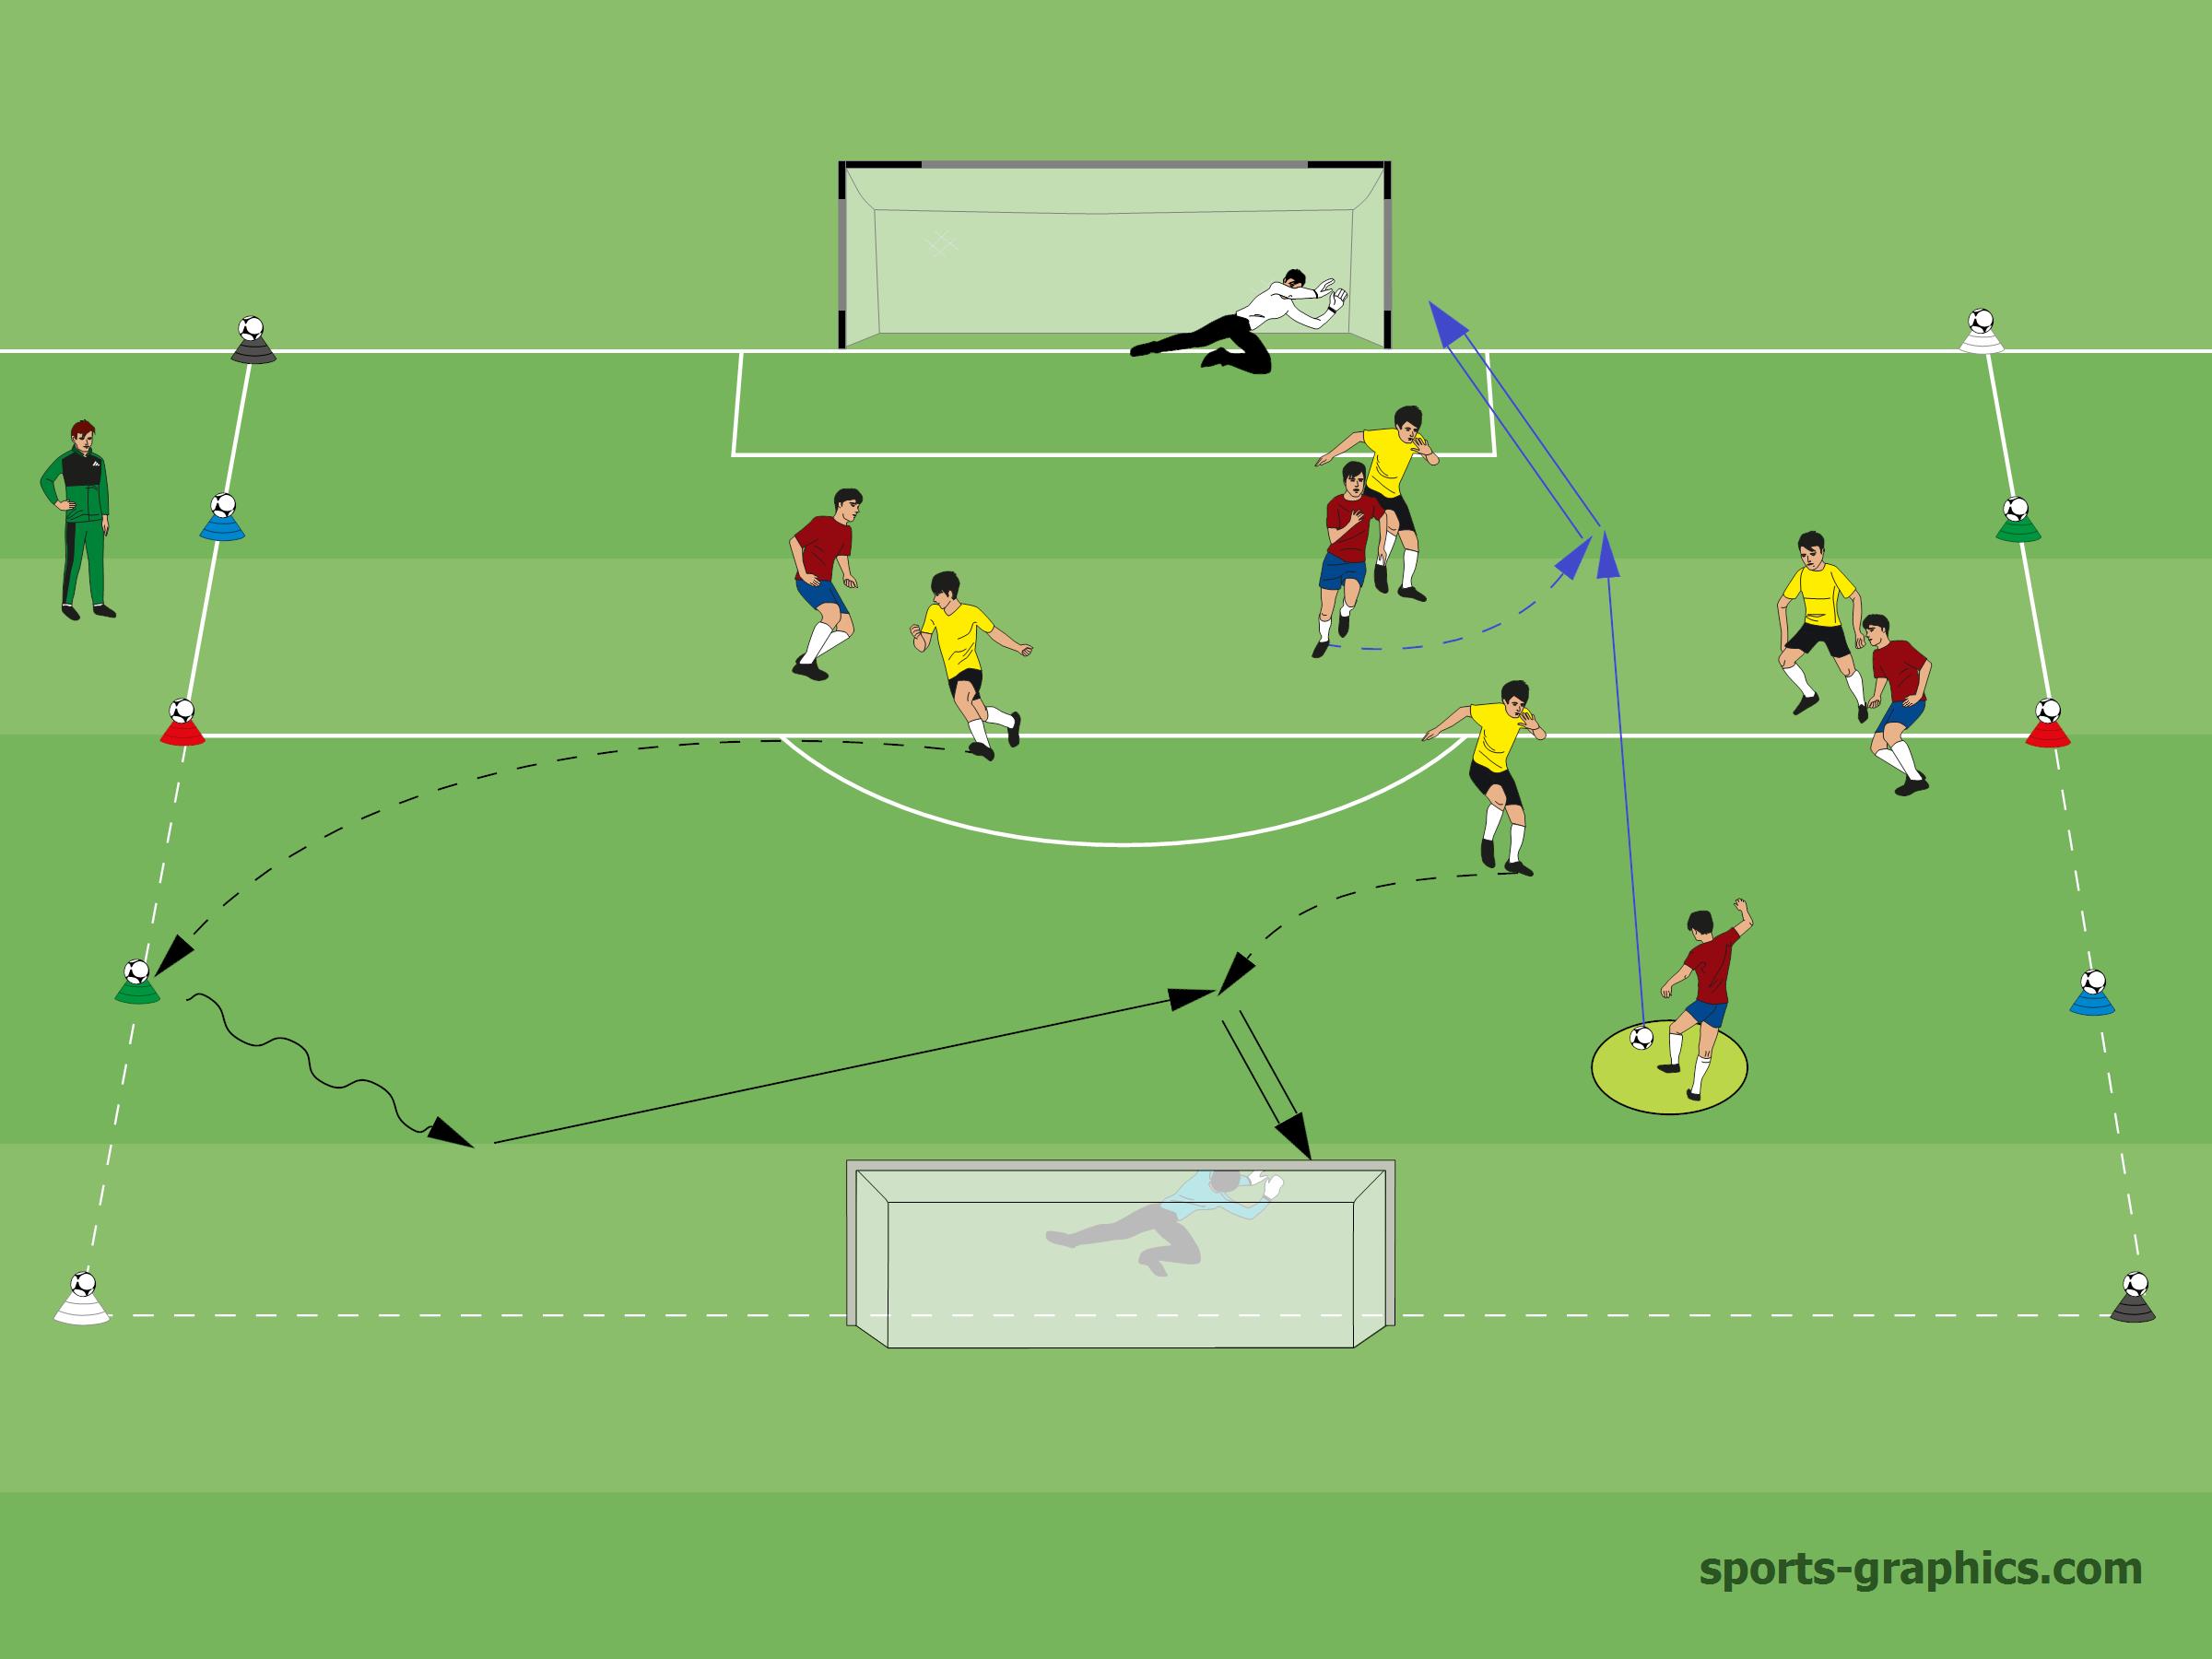 Transition Play like Liverpool FC